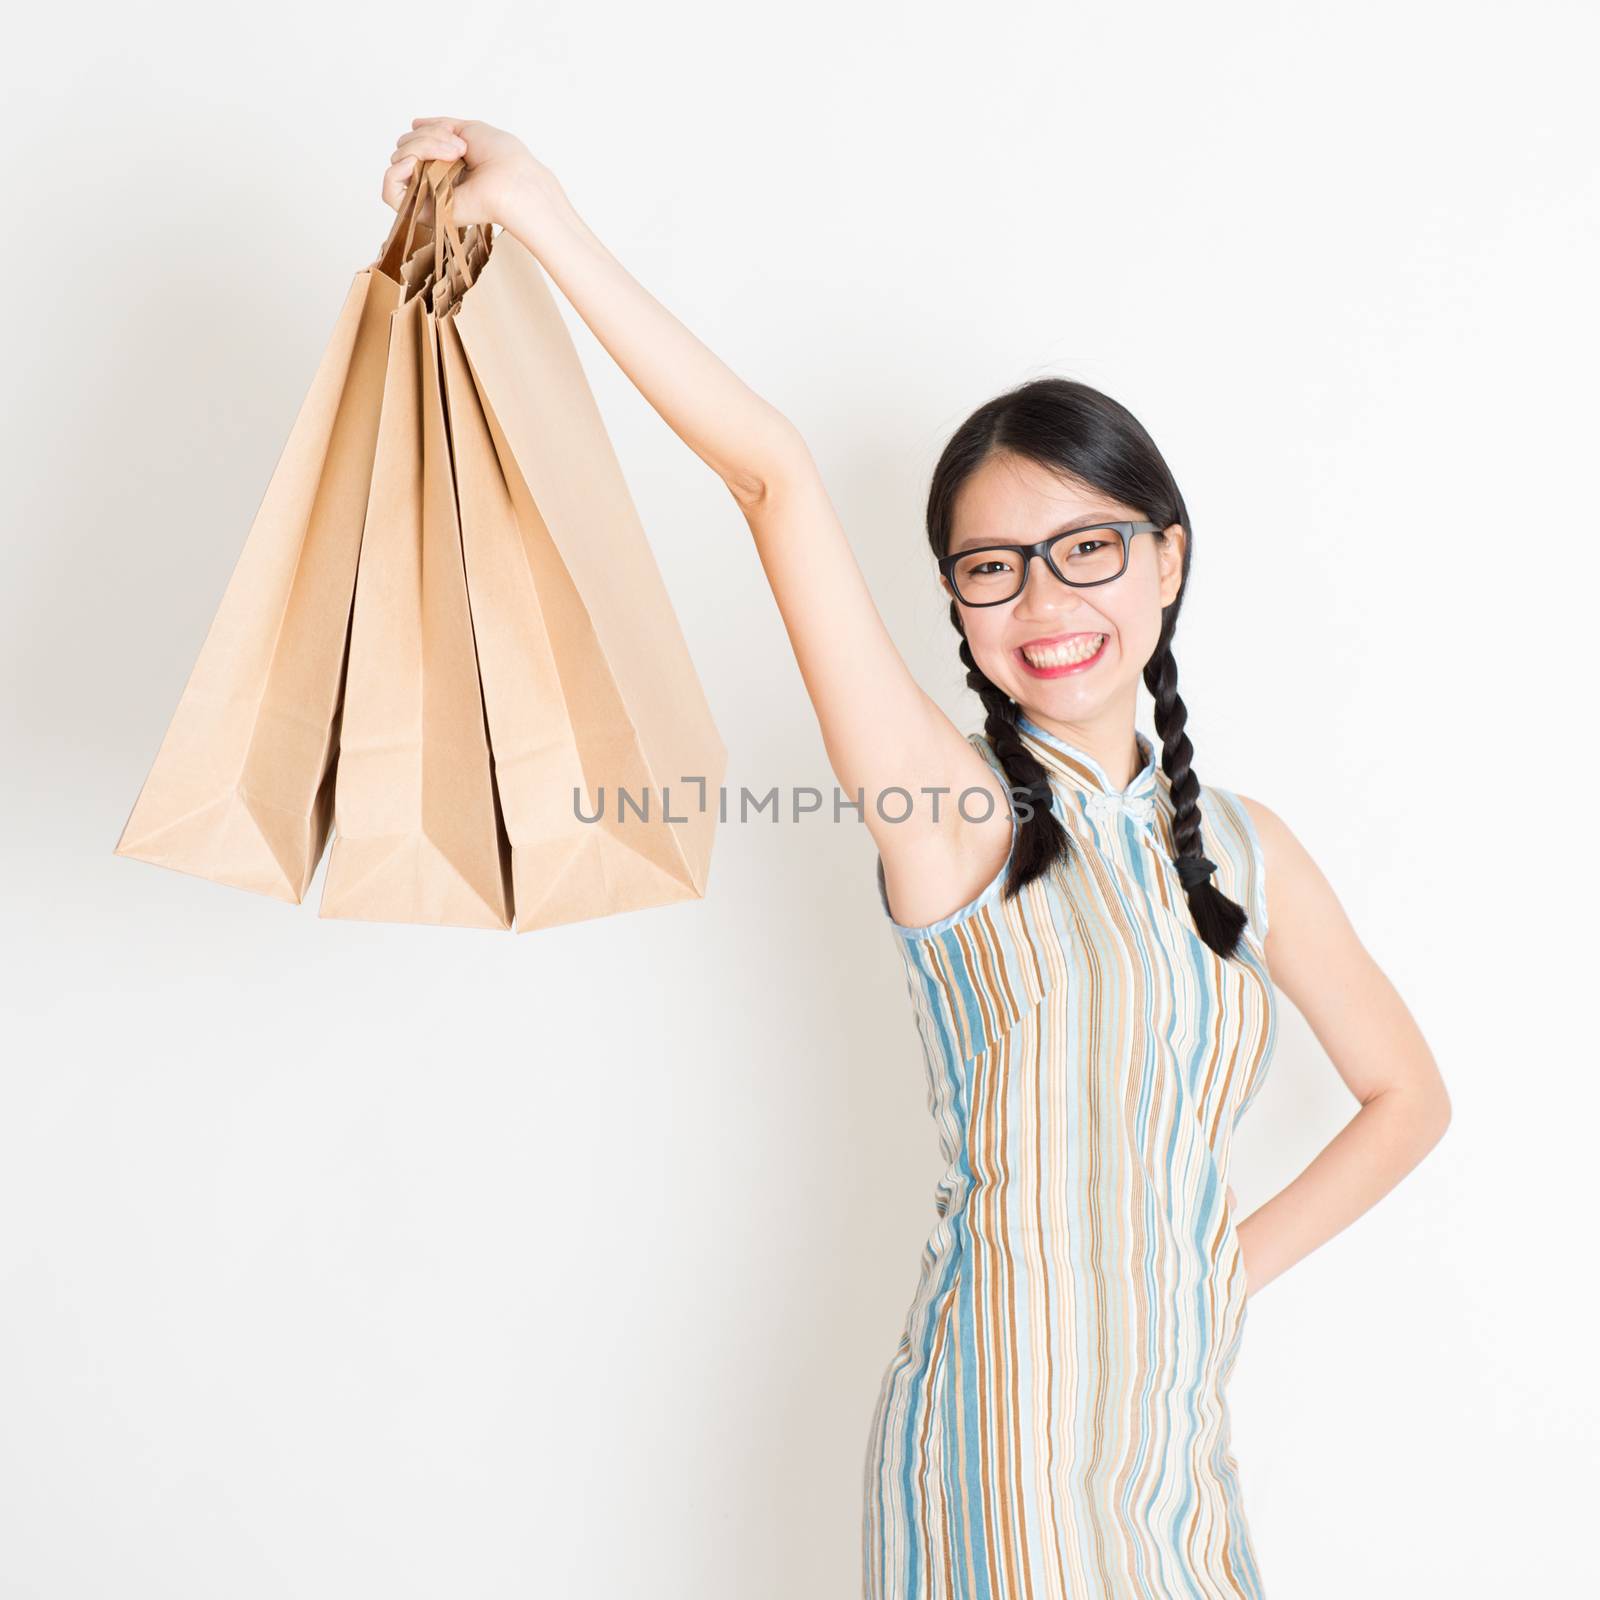 Portrait of young Asian female in traditional qipao dress shopping, hand holding paper bag, celebrating Chinese Lunar New Year or spring festival, standing on plain background.